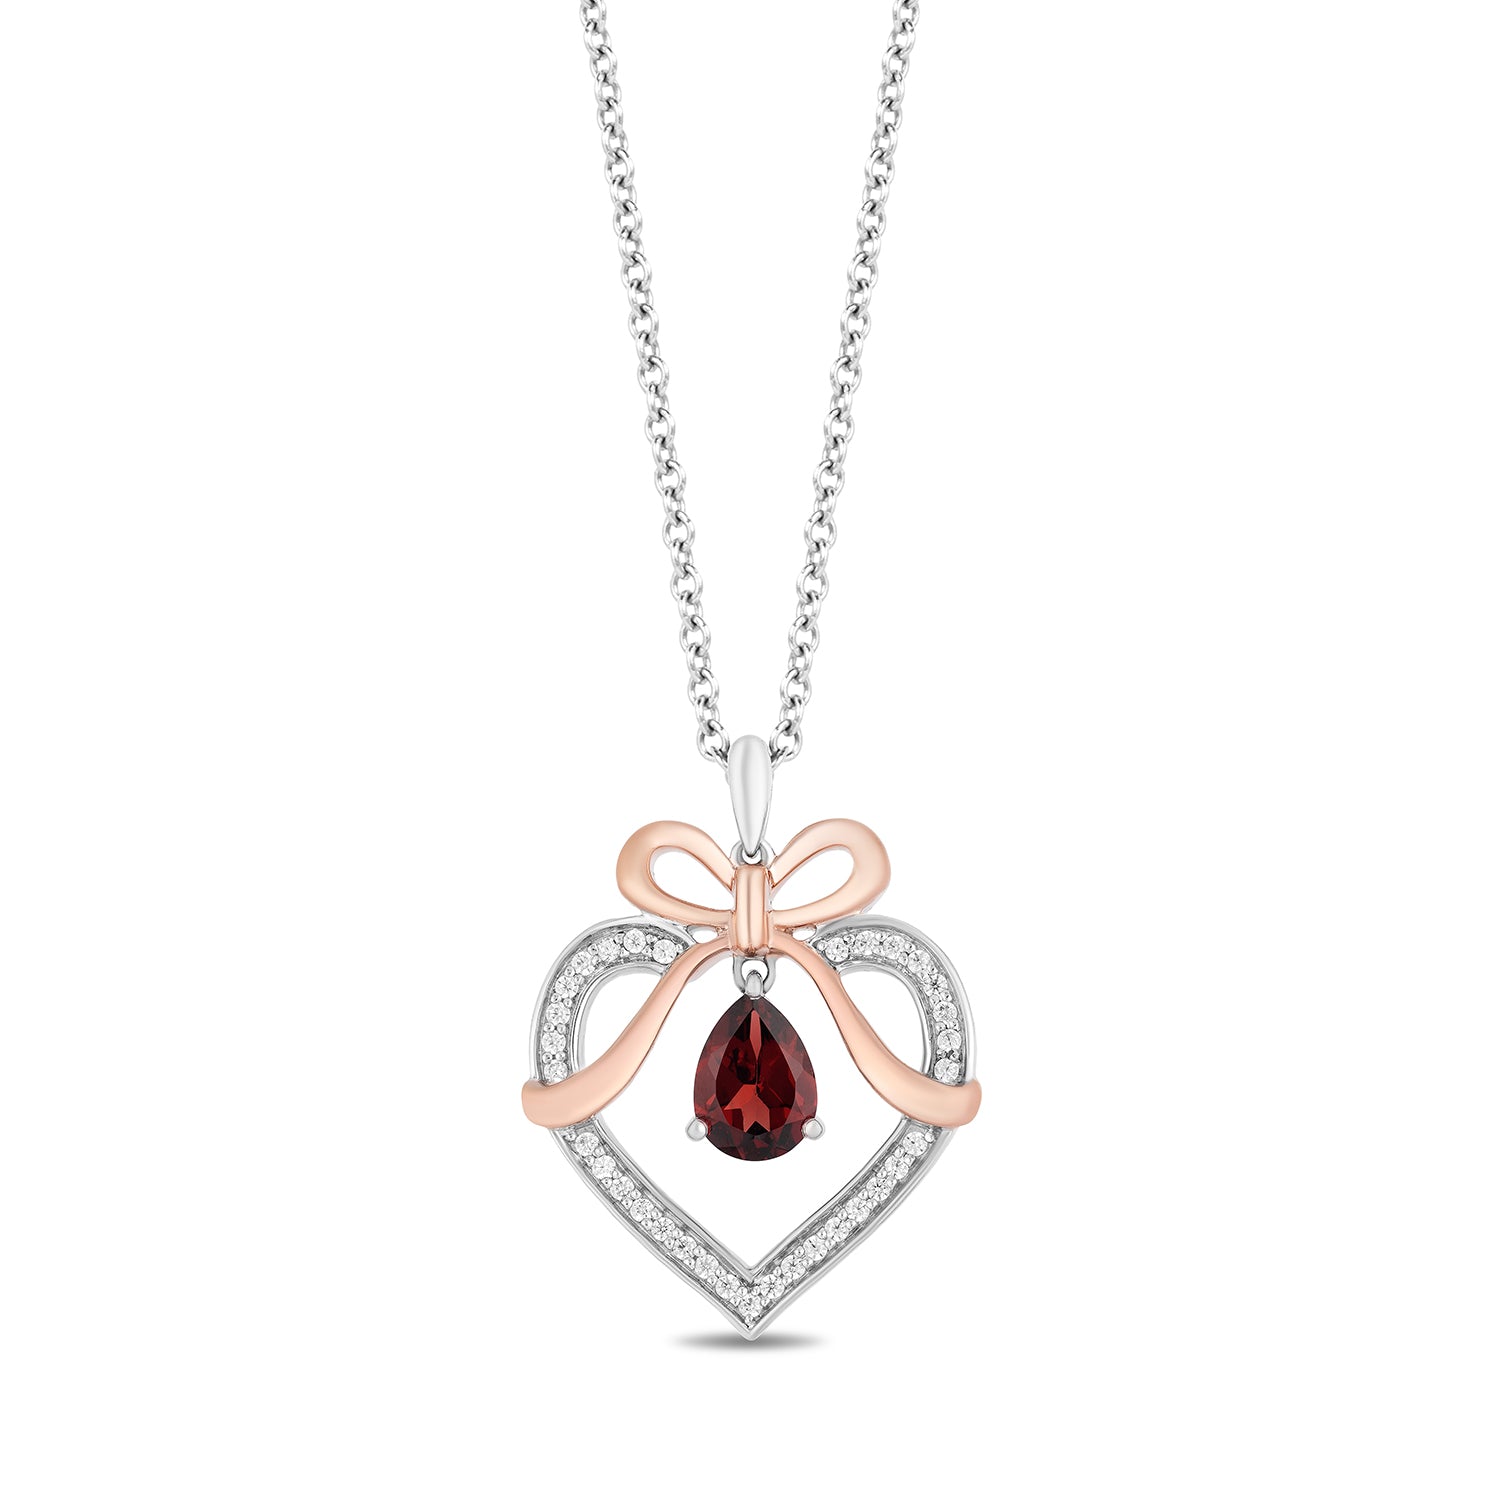 Disney Snow White Inspired Diamond & Garnet Pendant Necklace in 10K Sterling Silver & Rose Gold 1/6 Cttw | Enchanted Disney Fine Jewelry